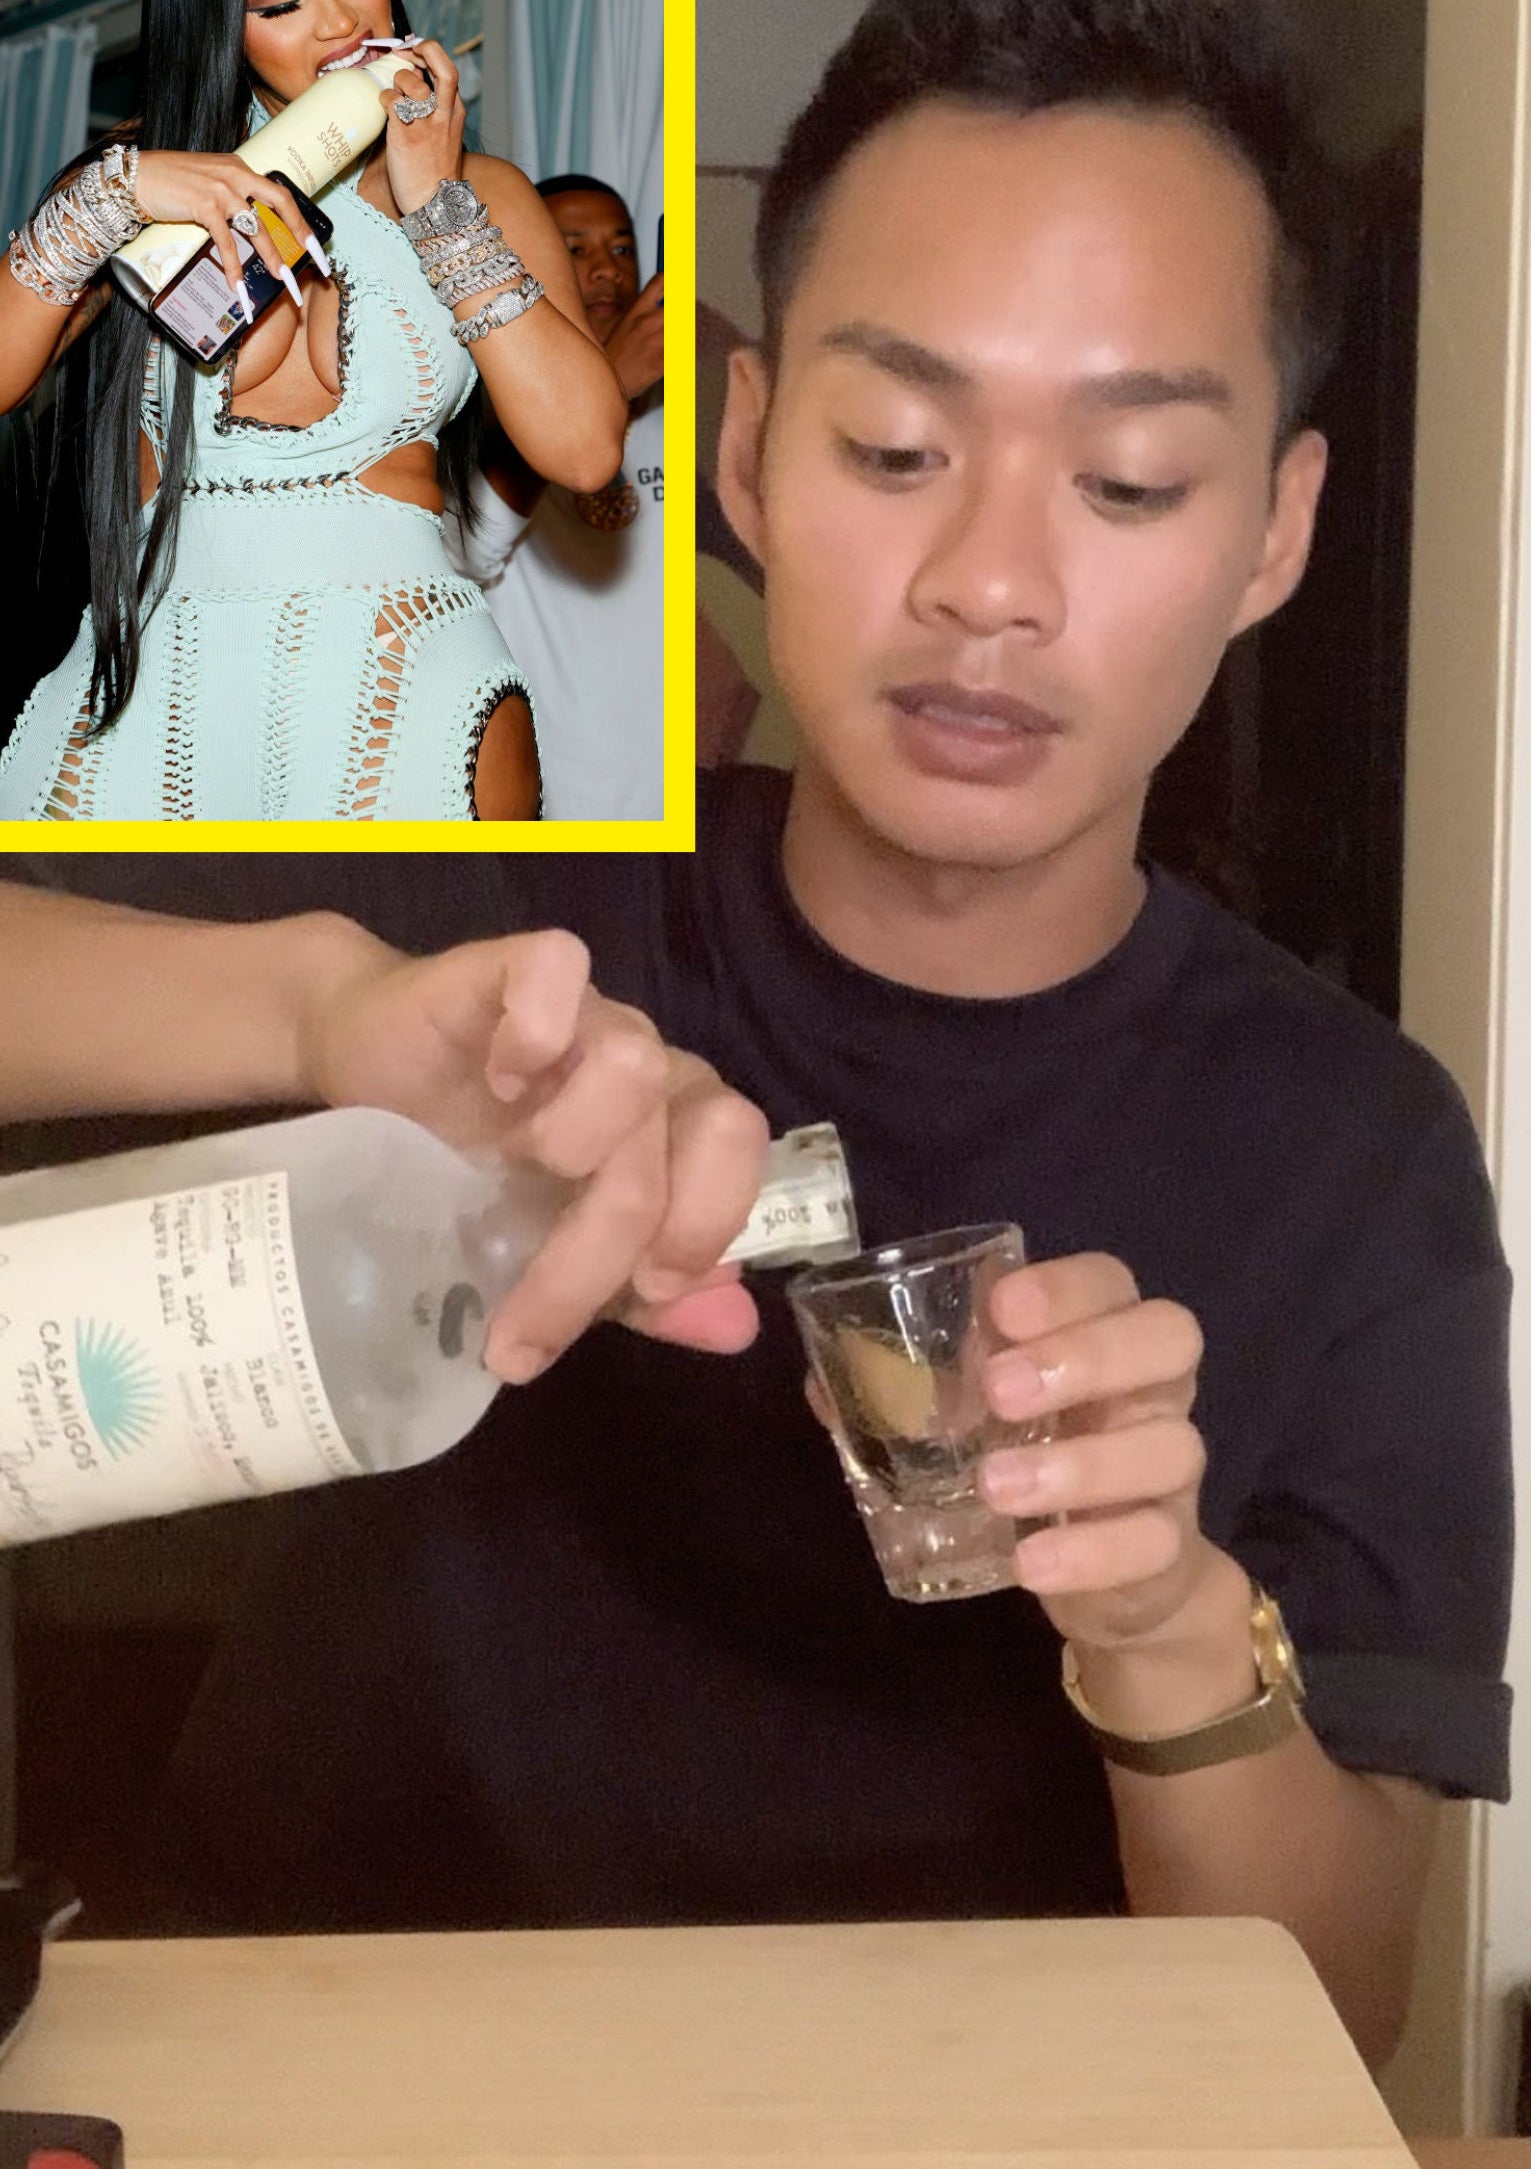 (insert) cardi b biting liquor bottle (right) author pouring tequila